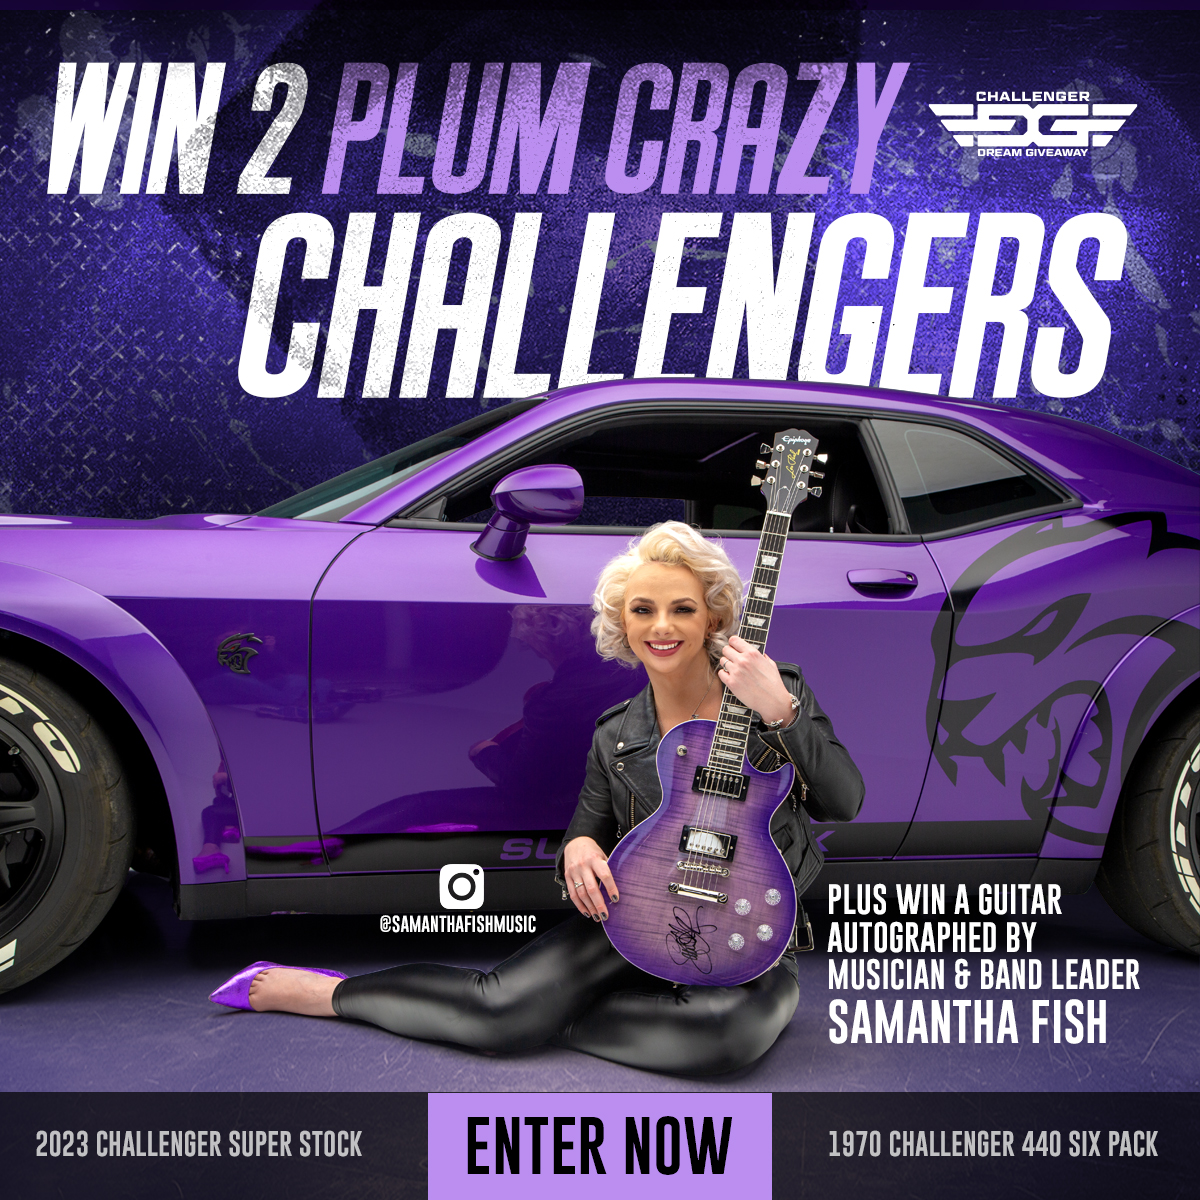 🌟2025 Challenger @DreamGiveaway 🏁 Donate to Veterans and children’s charities and be entered to win cars, guitars and tickets! Compliments of yours truly ❣️ dreamgiveaway.com/dg/challenger?…